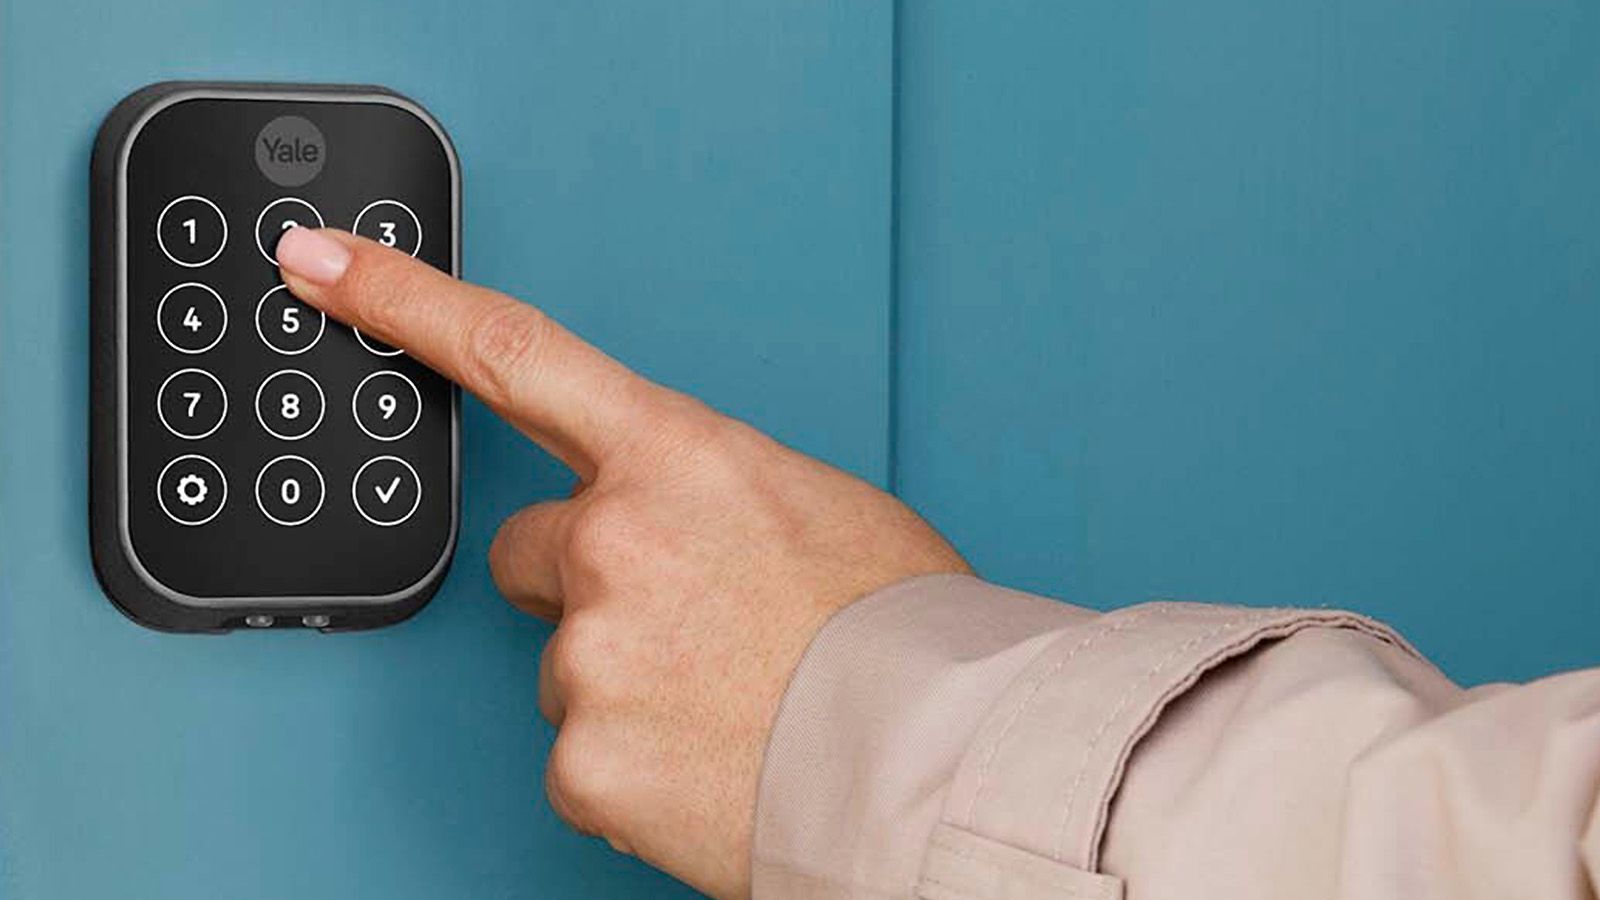 I've tested dozens of smart locks and this one is the most